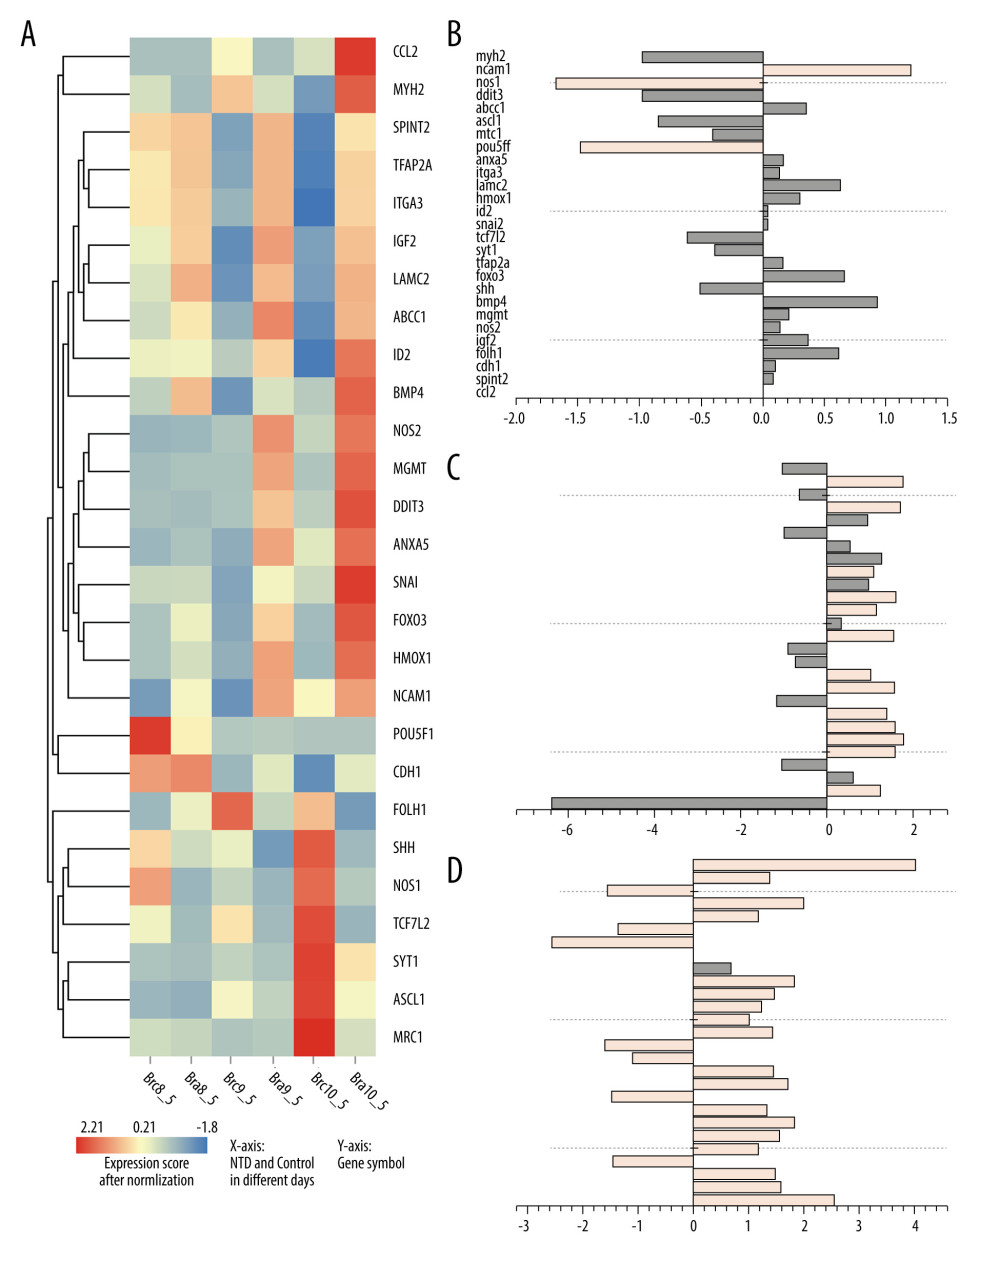 Expression of 27 differentially expressed gene in E8.5, E9.5, and E10.5. (A) Heatmap of DGEs’ expression; (B–D) X-axis: Log2 Ratio in E8.5 (RA/Con), Log2 Ratio in E9.5 (RA/Con), Log2 Ratio in E10.5 (RA/Con) respectively, Y-axis: Gene Symbol. Flesh colored: genes with |log2 Ratio|>1 and P value<0.05; light gray: genes with |log2 Ratio|<1 or P value>0.05. These figures were created by an open-source tool RStudio, version 1.1.456.